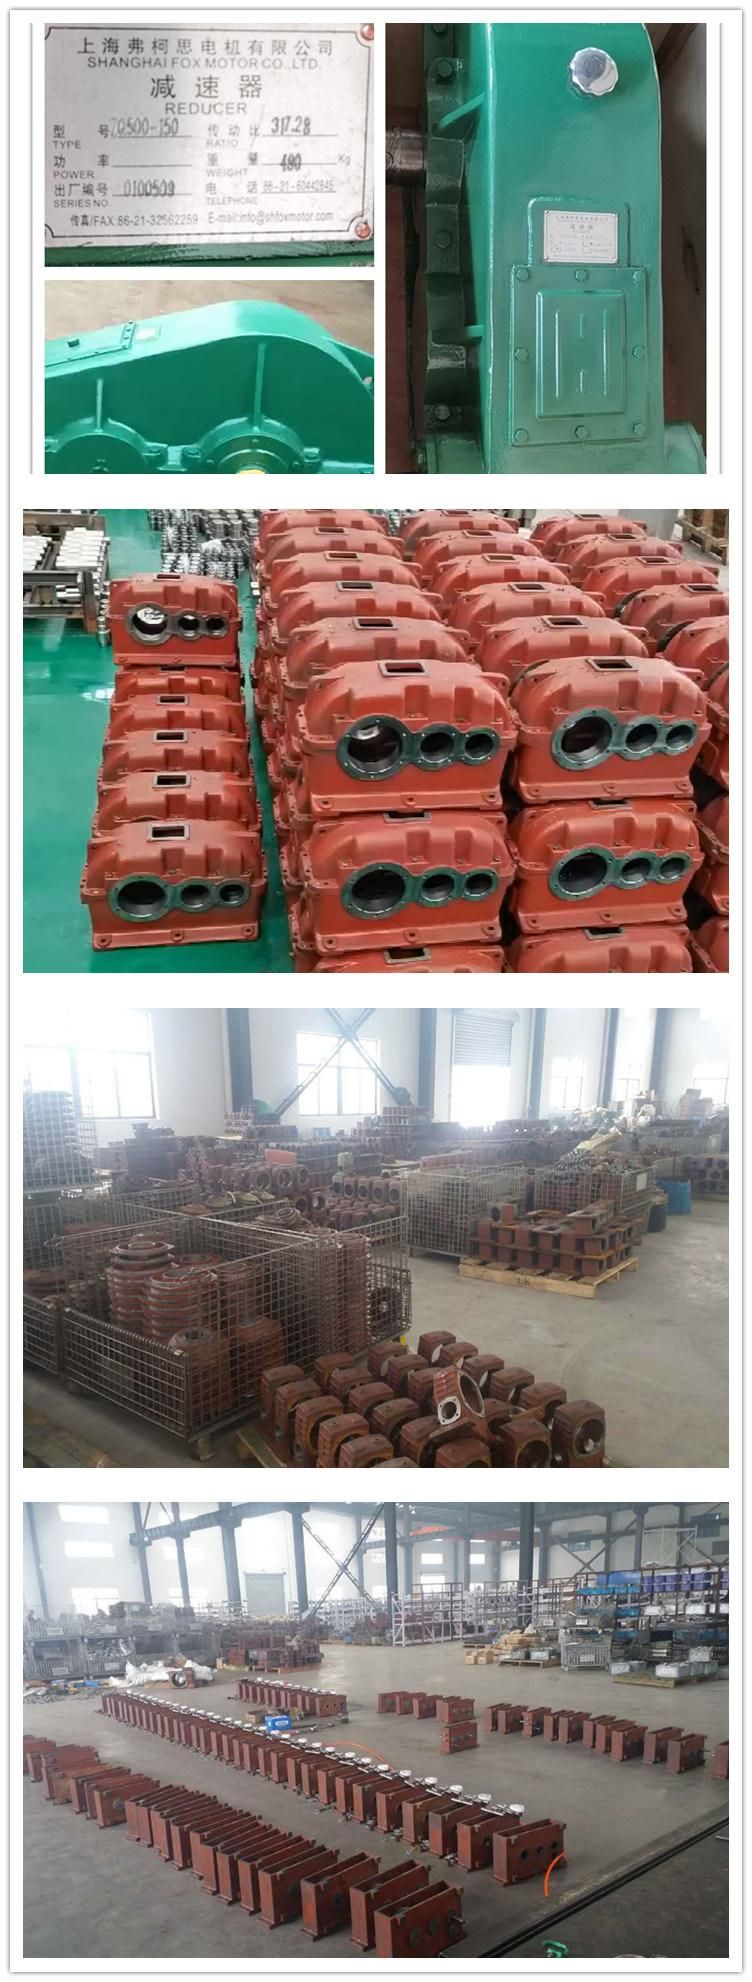 Hot selling soft tooth gear cylindrical gearbox  transmission Reducer ZQ500  JZQ650 gear speed reducer